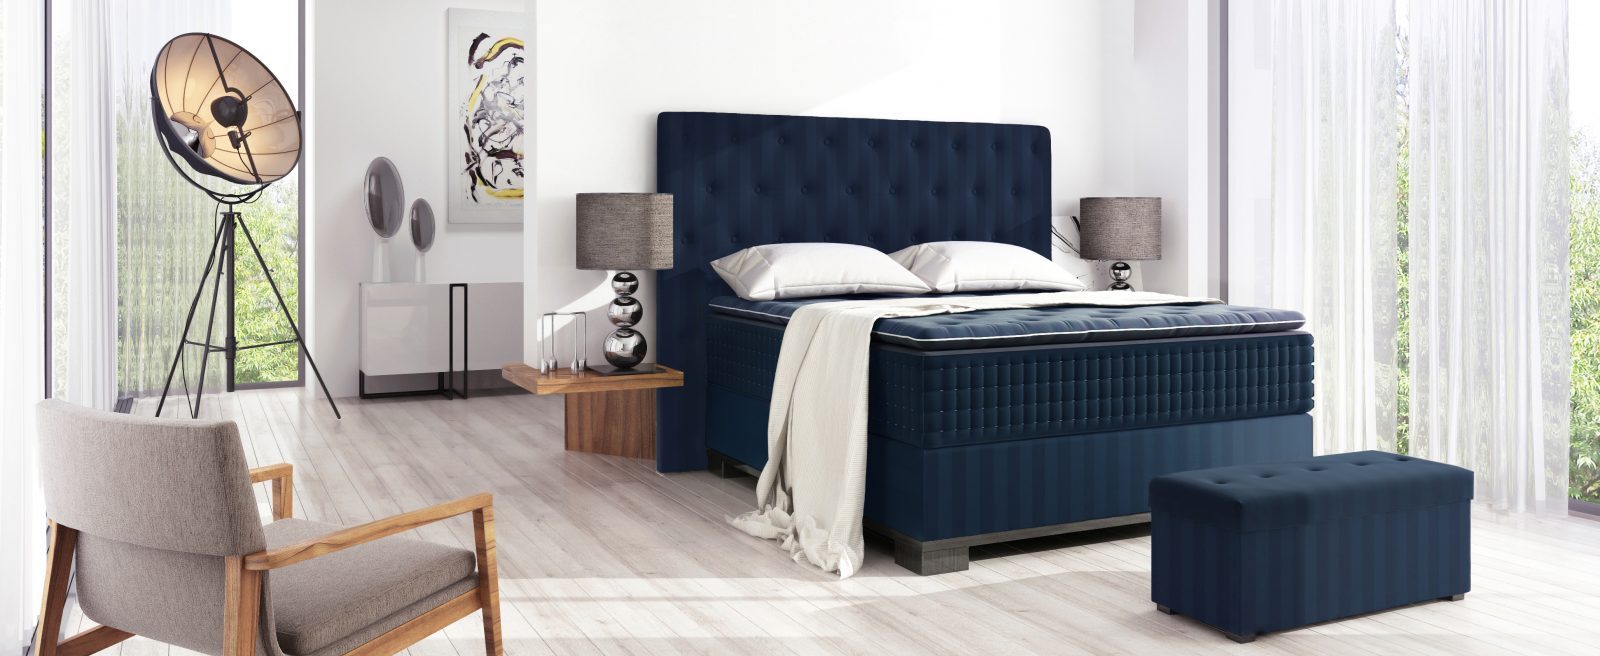 pauly-beds-continental-luxury-mattress-sissi-small